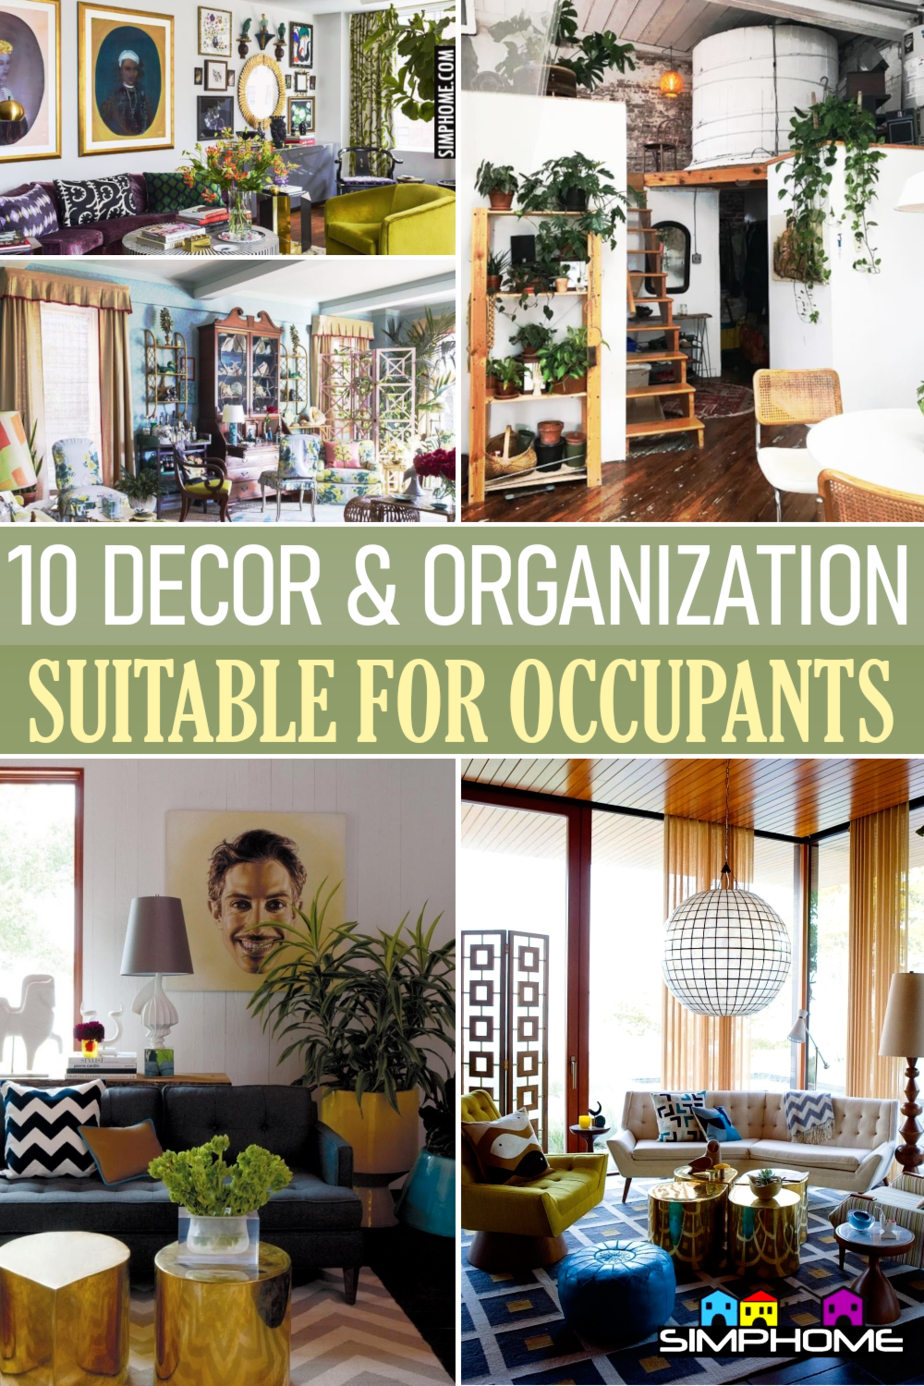 10 Renter Friendly Living Room Decor and Organization via Simphome.comFeatured